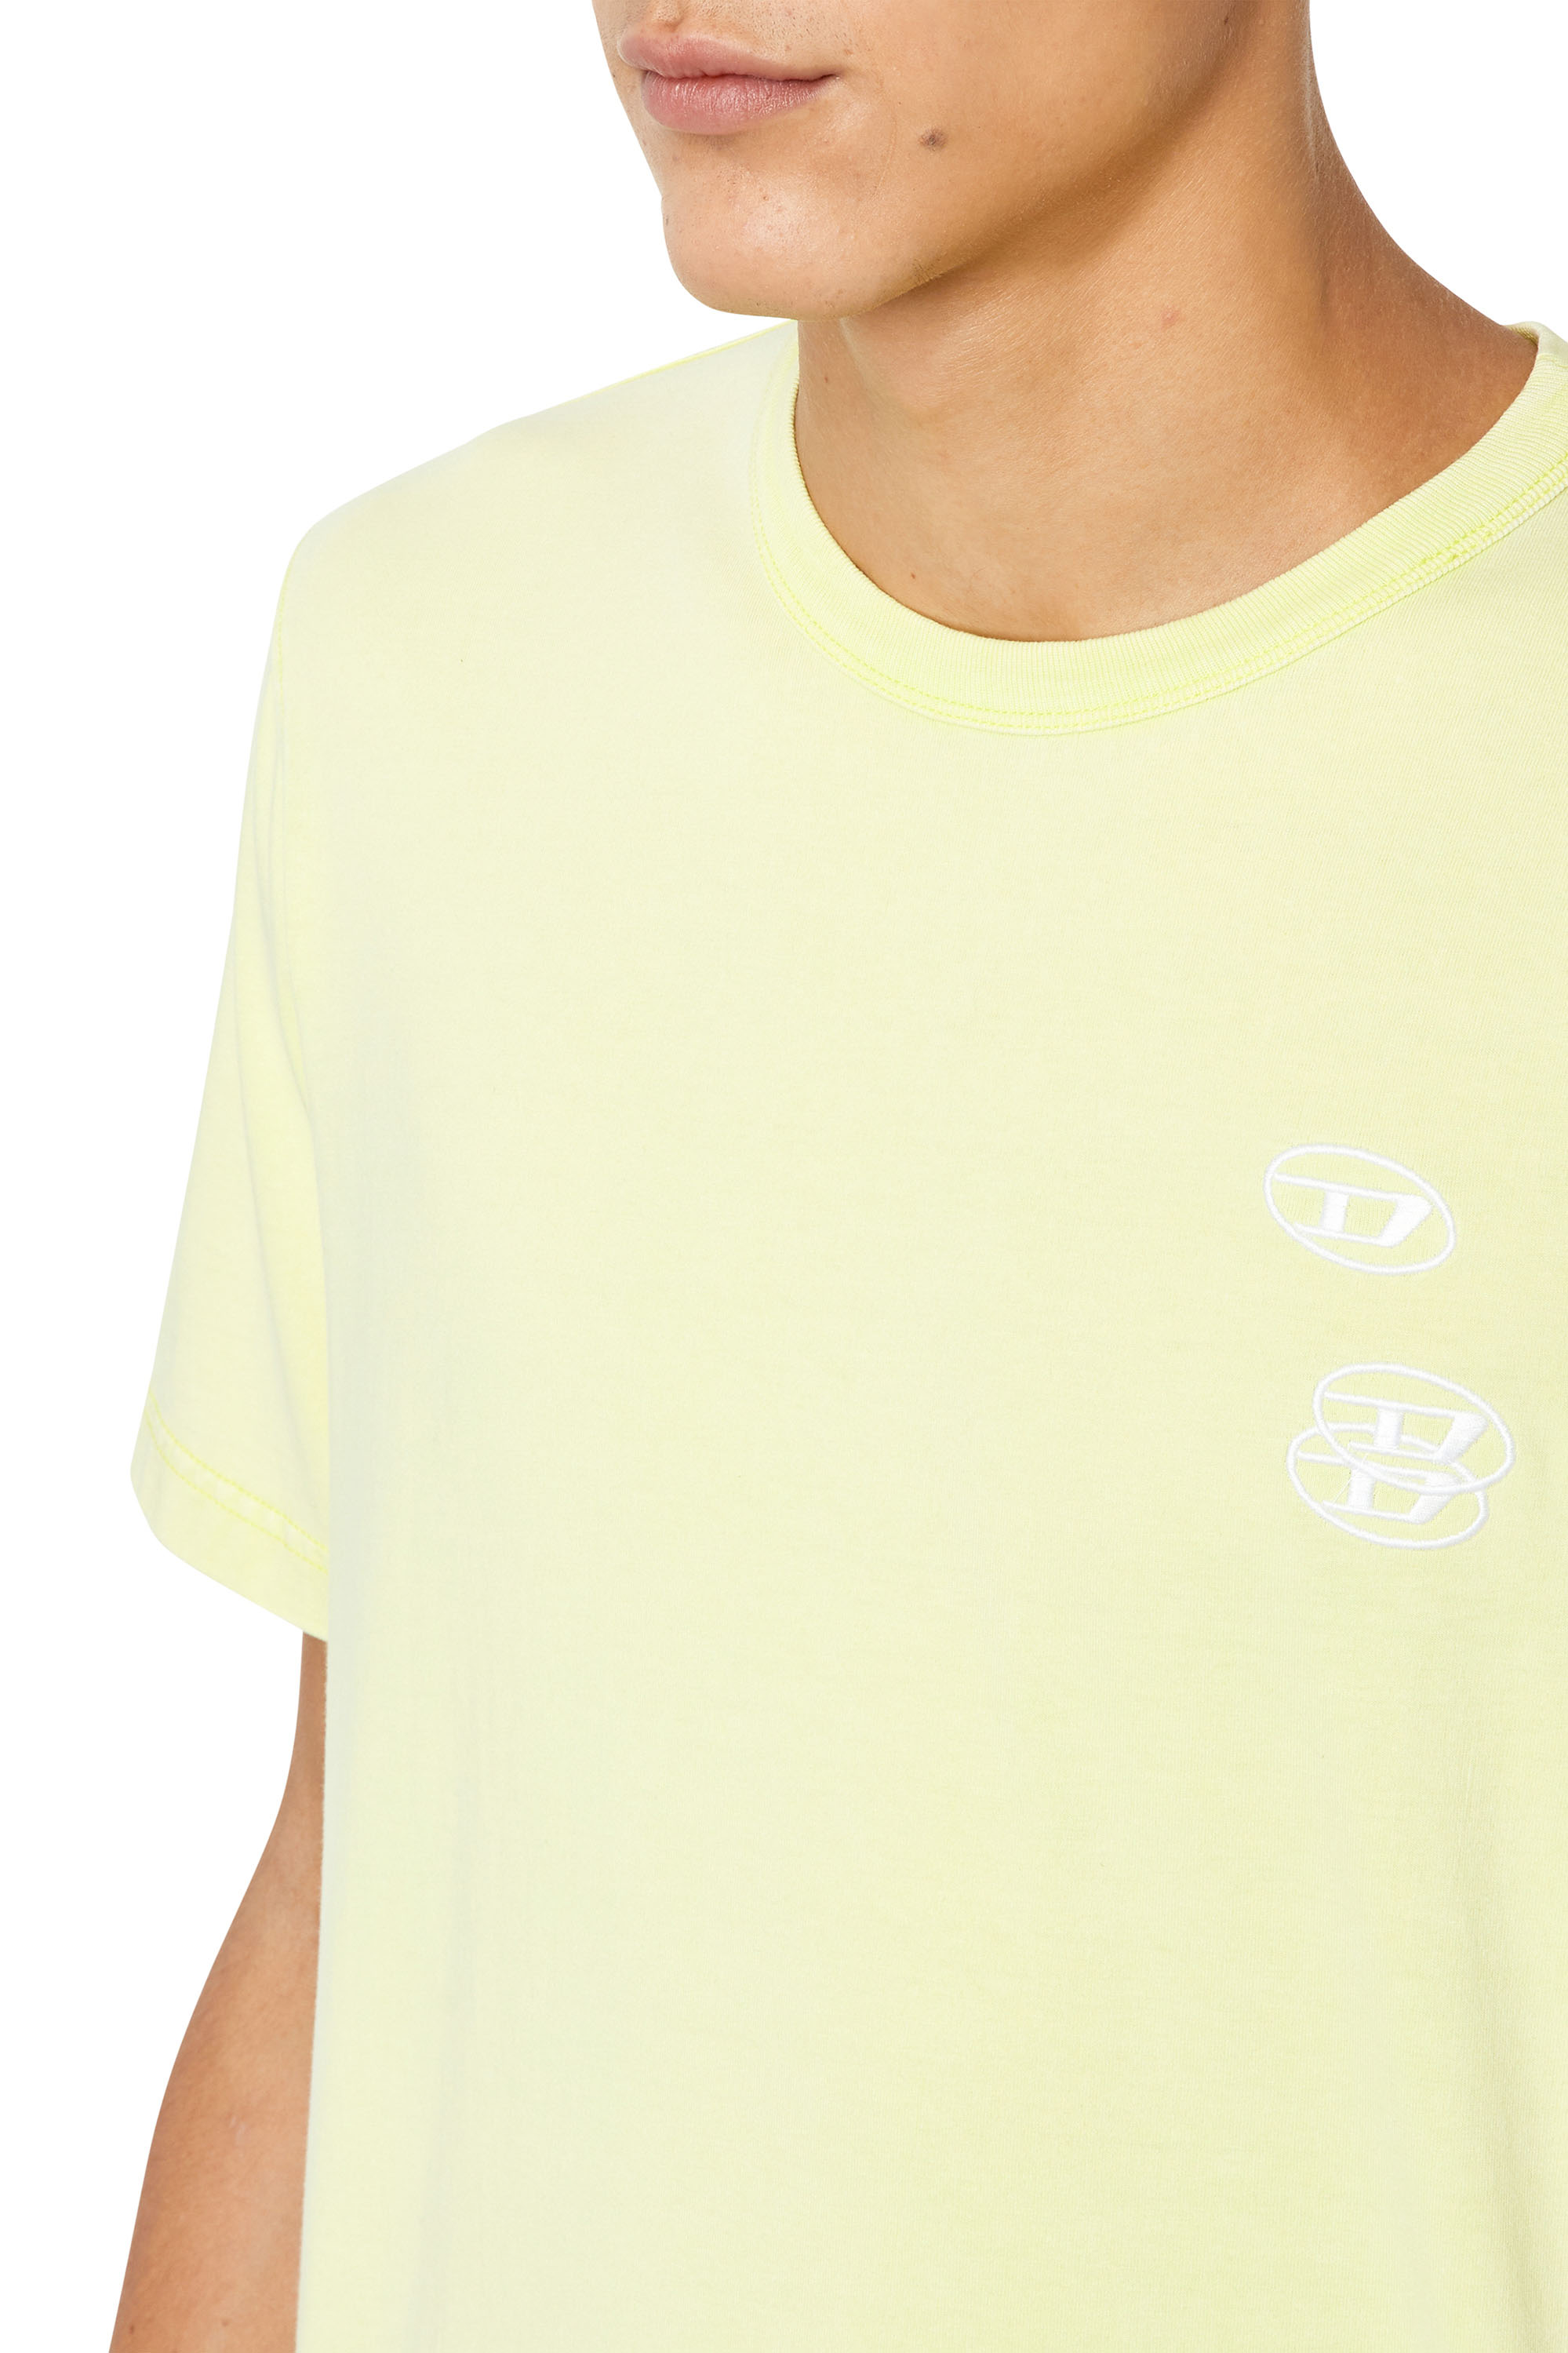 Diesel - T-JUST-G14, Yellow Fluo - Image 4